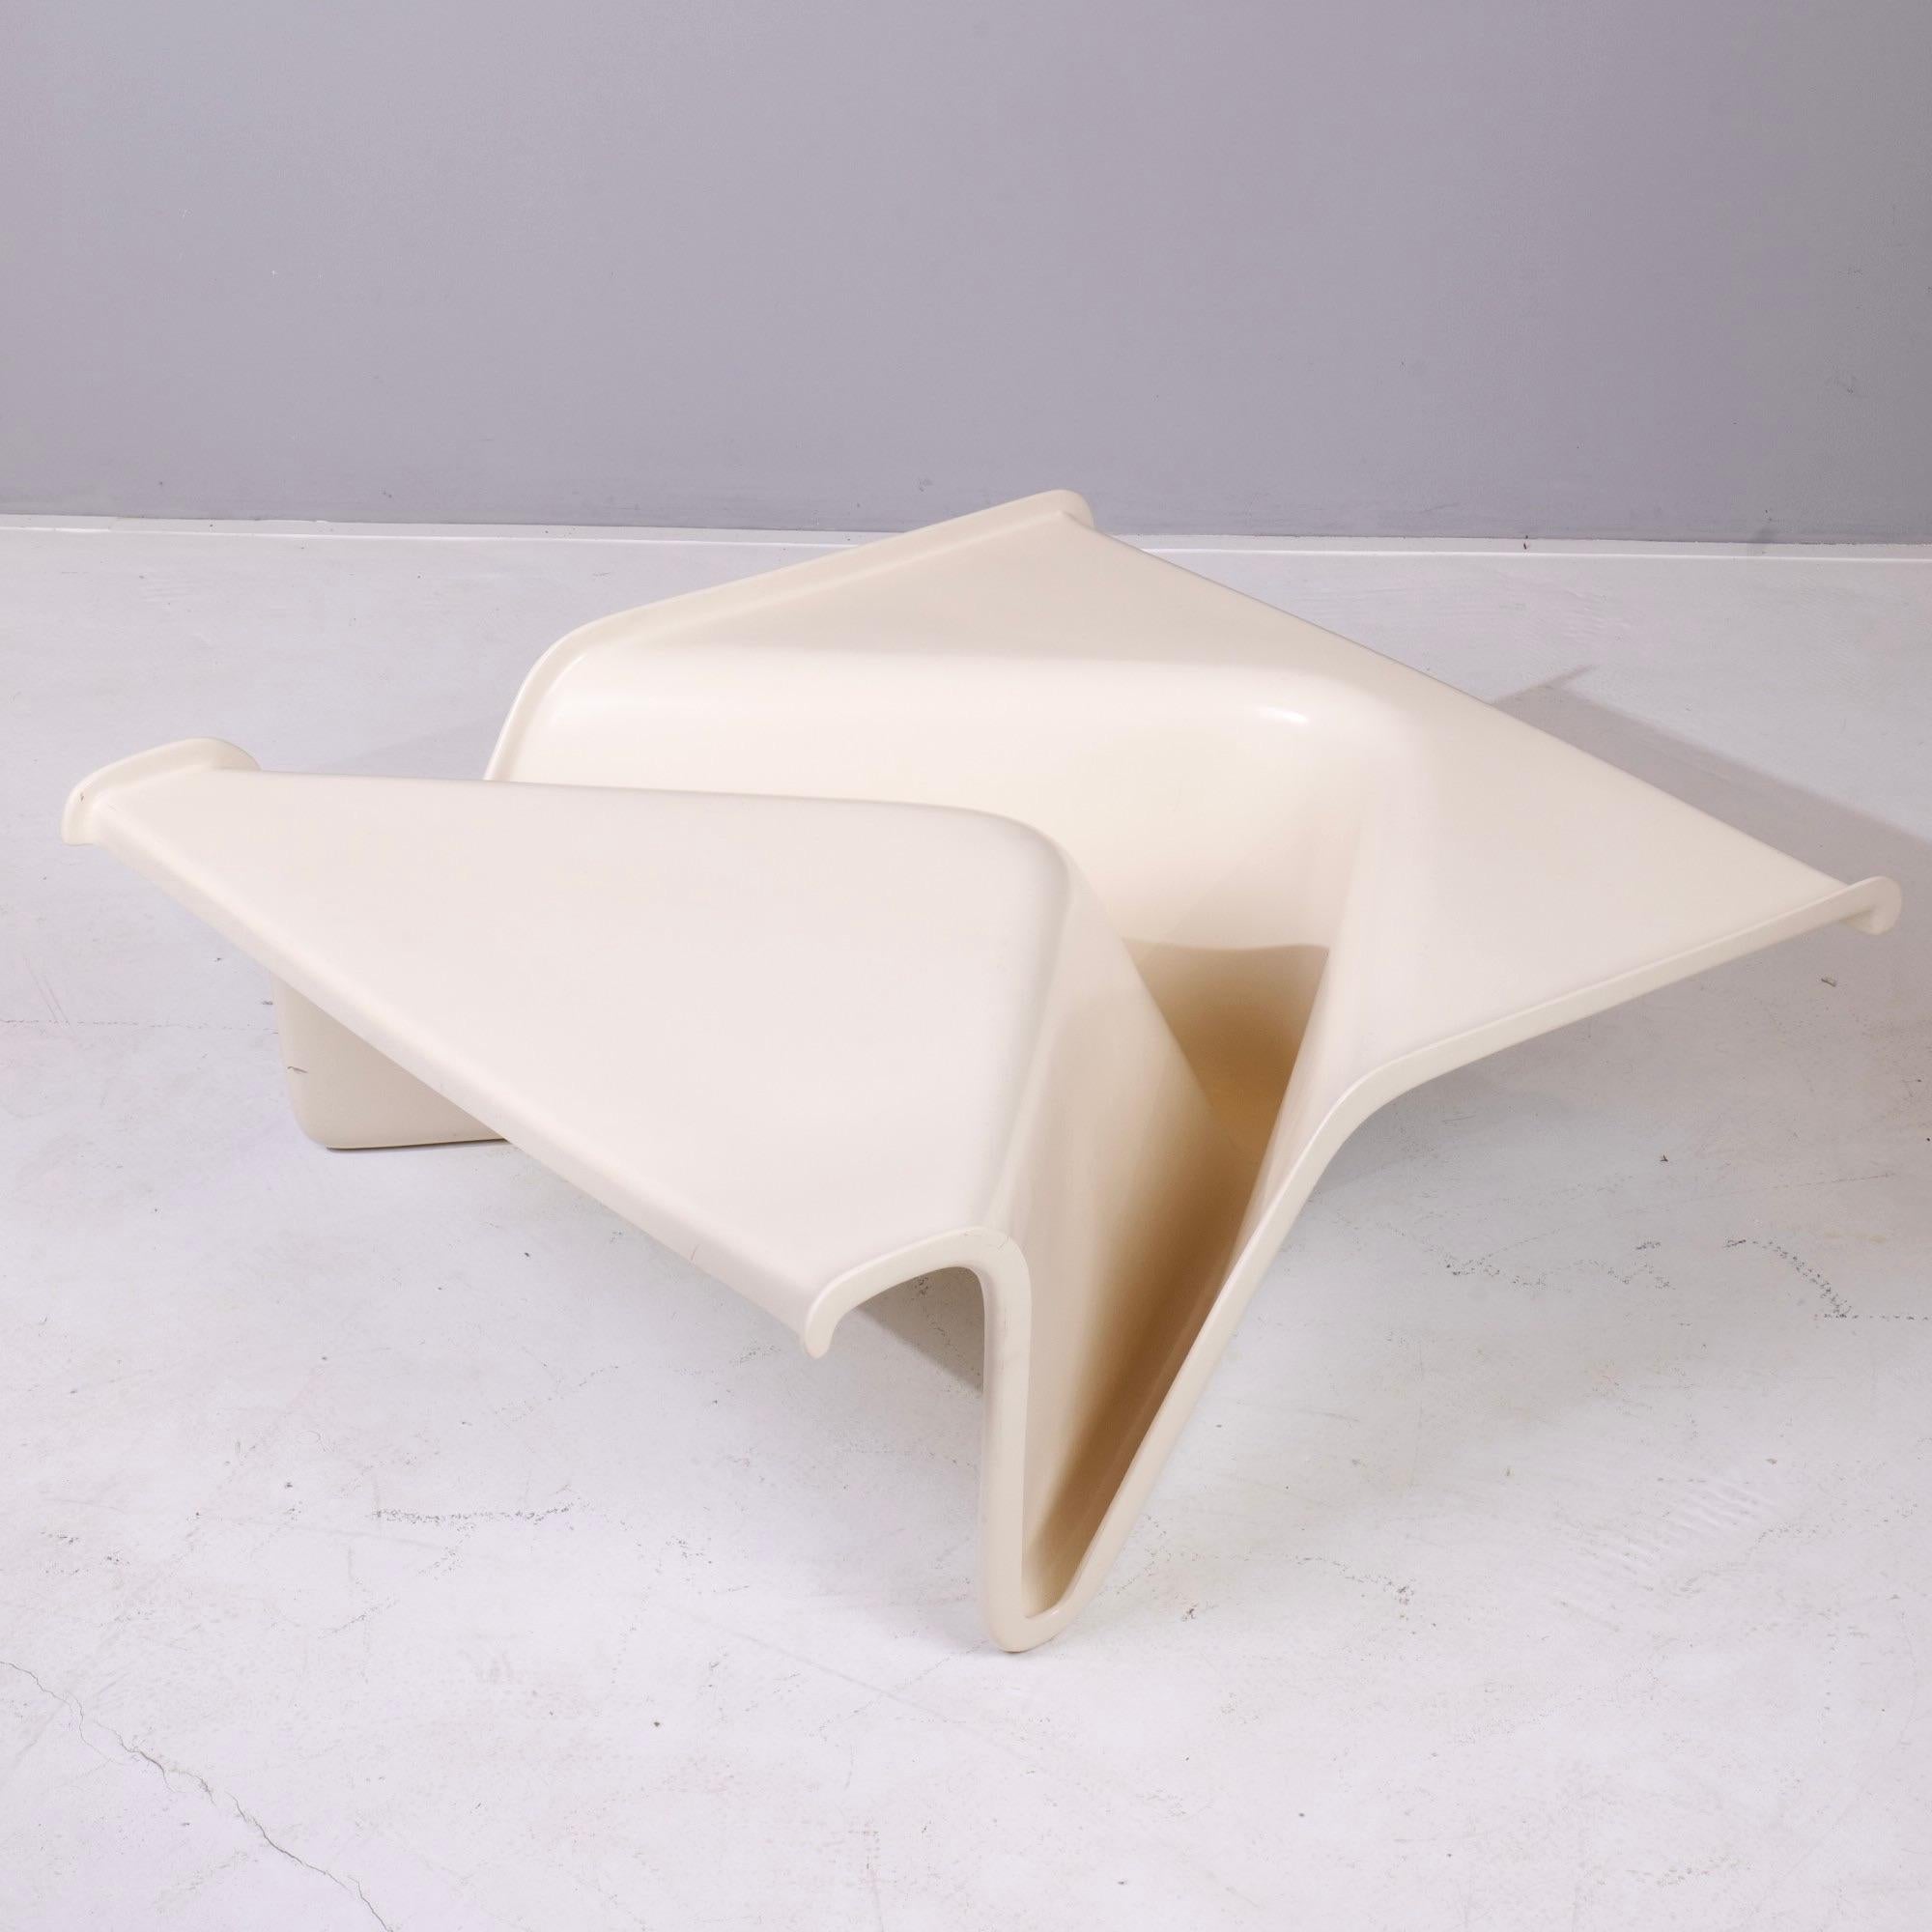 Late 20th Century Space Age Sofa Table by Cesare Leonardi & Franca Stagi Kappa for Fiarm, Italy For Sale